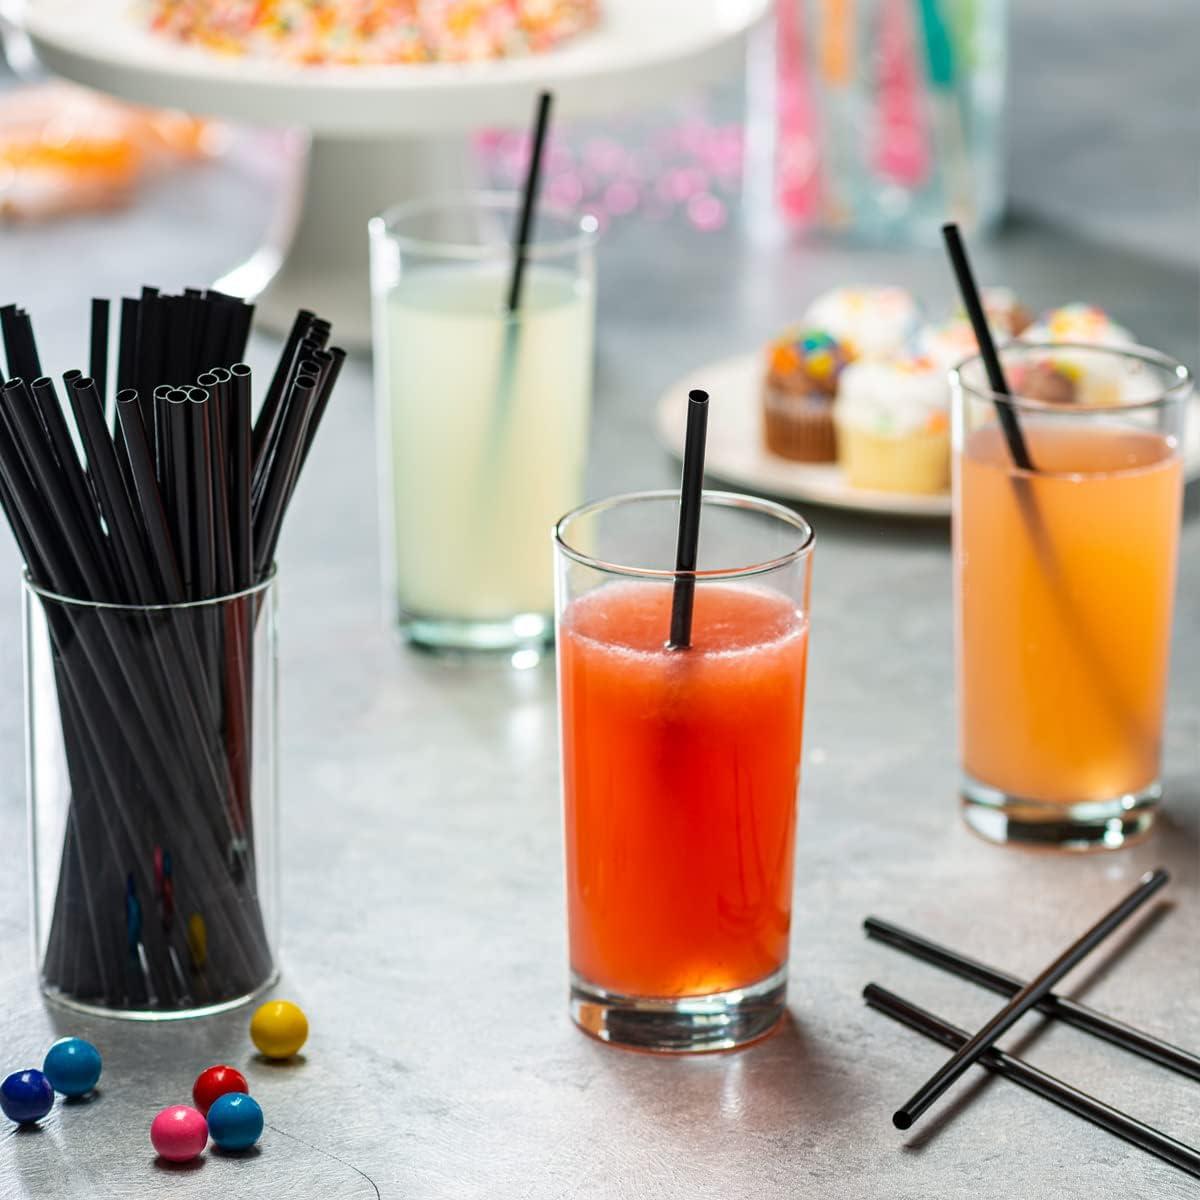 Comfy Package Wide Straws Disposable Plastic Straws for Drinking, Assorted  Colors 100-Pack 